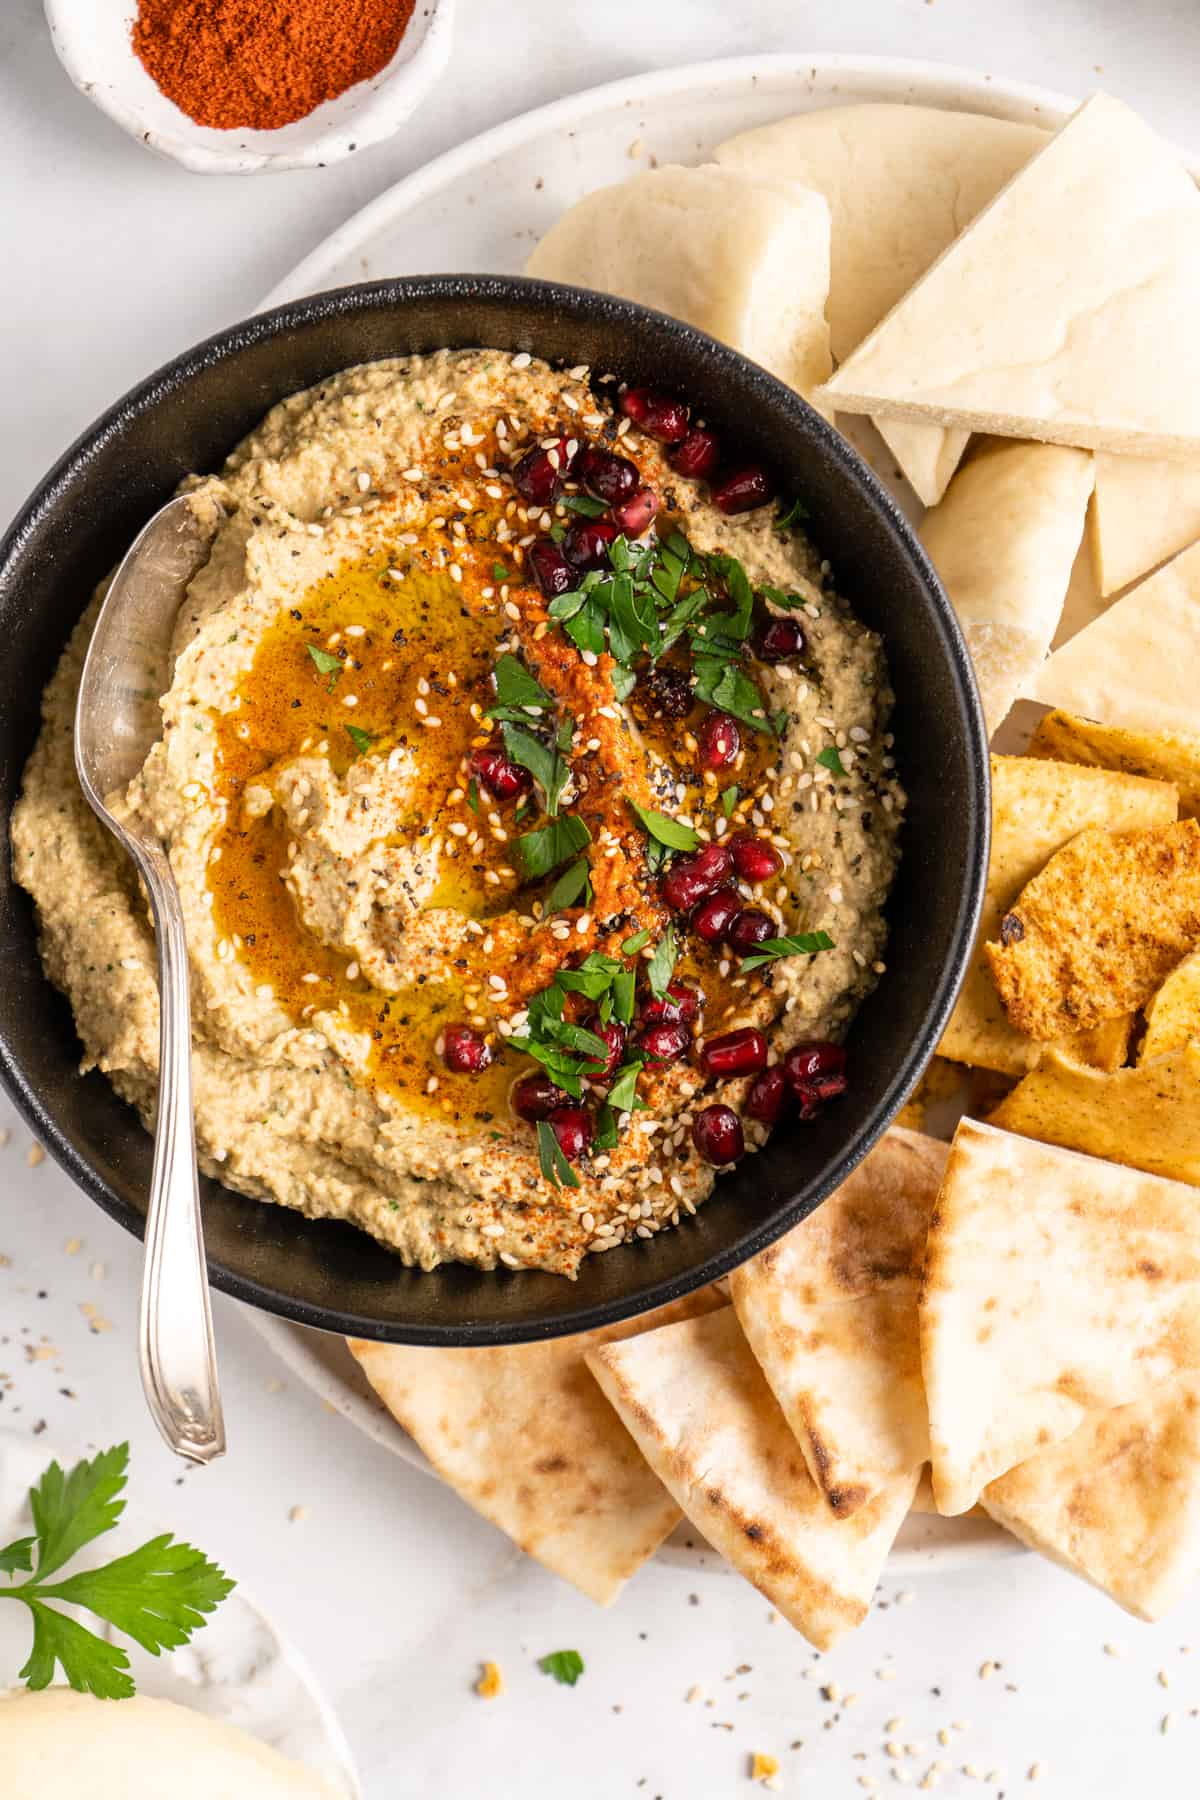 Overhead view of baba ghanoush in black bowl with spoon, surrounded by pitas